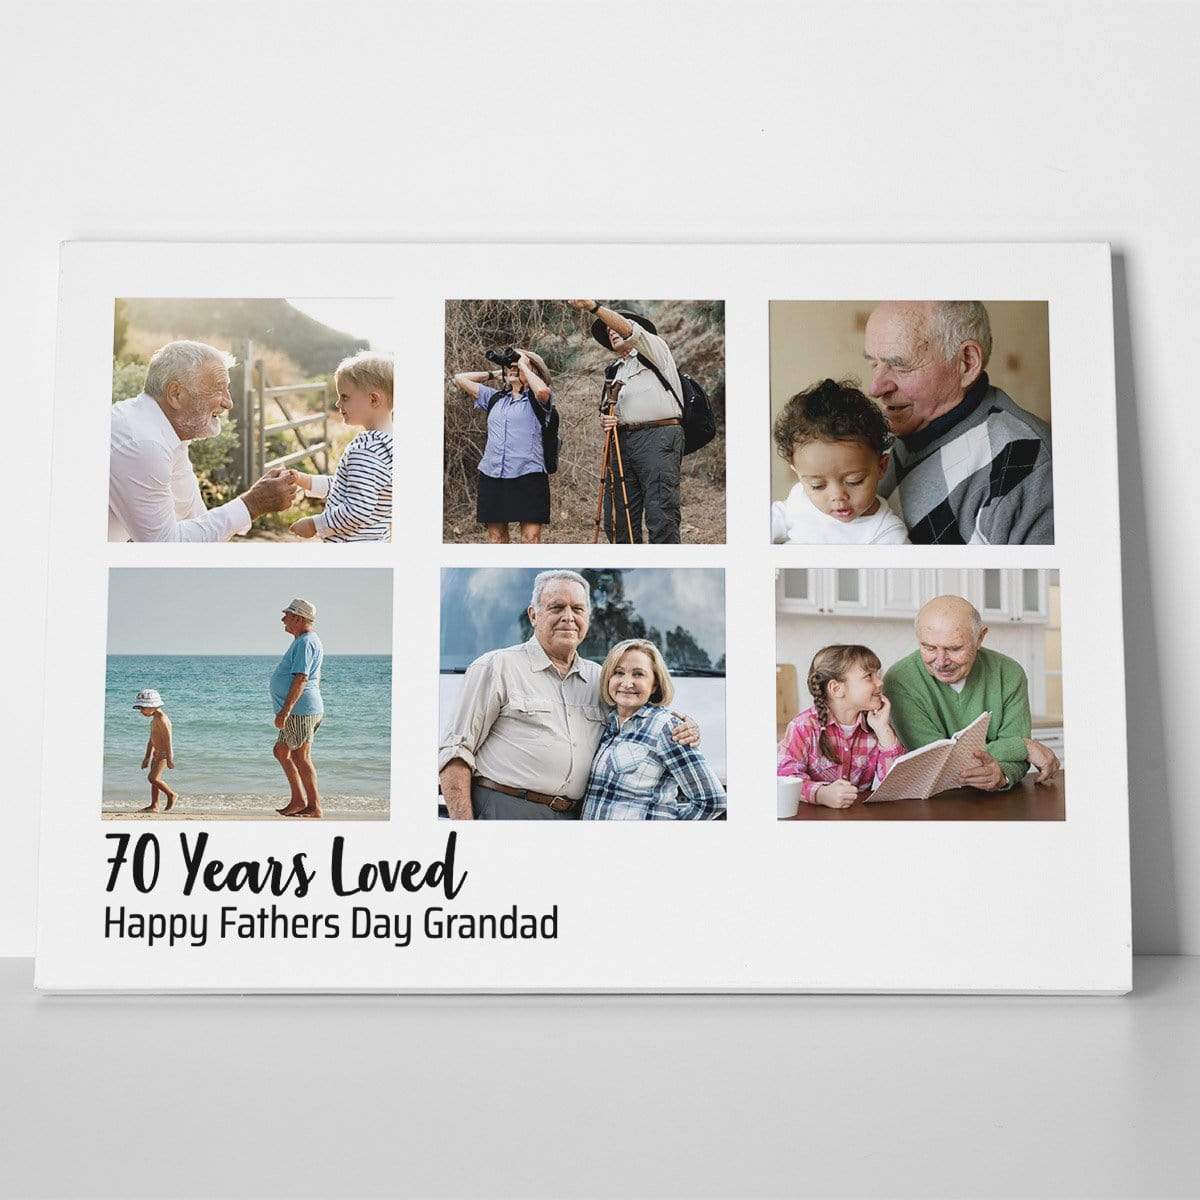 Years Loved Photo Canvas Print